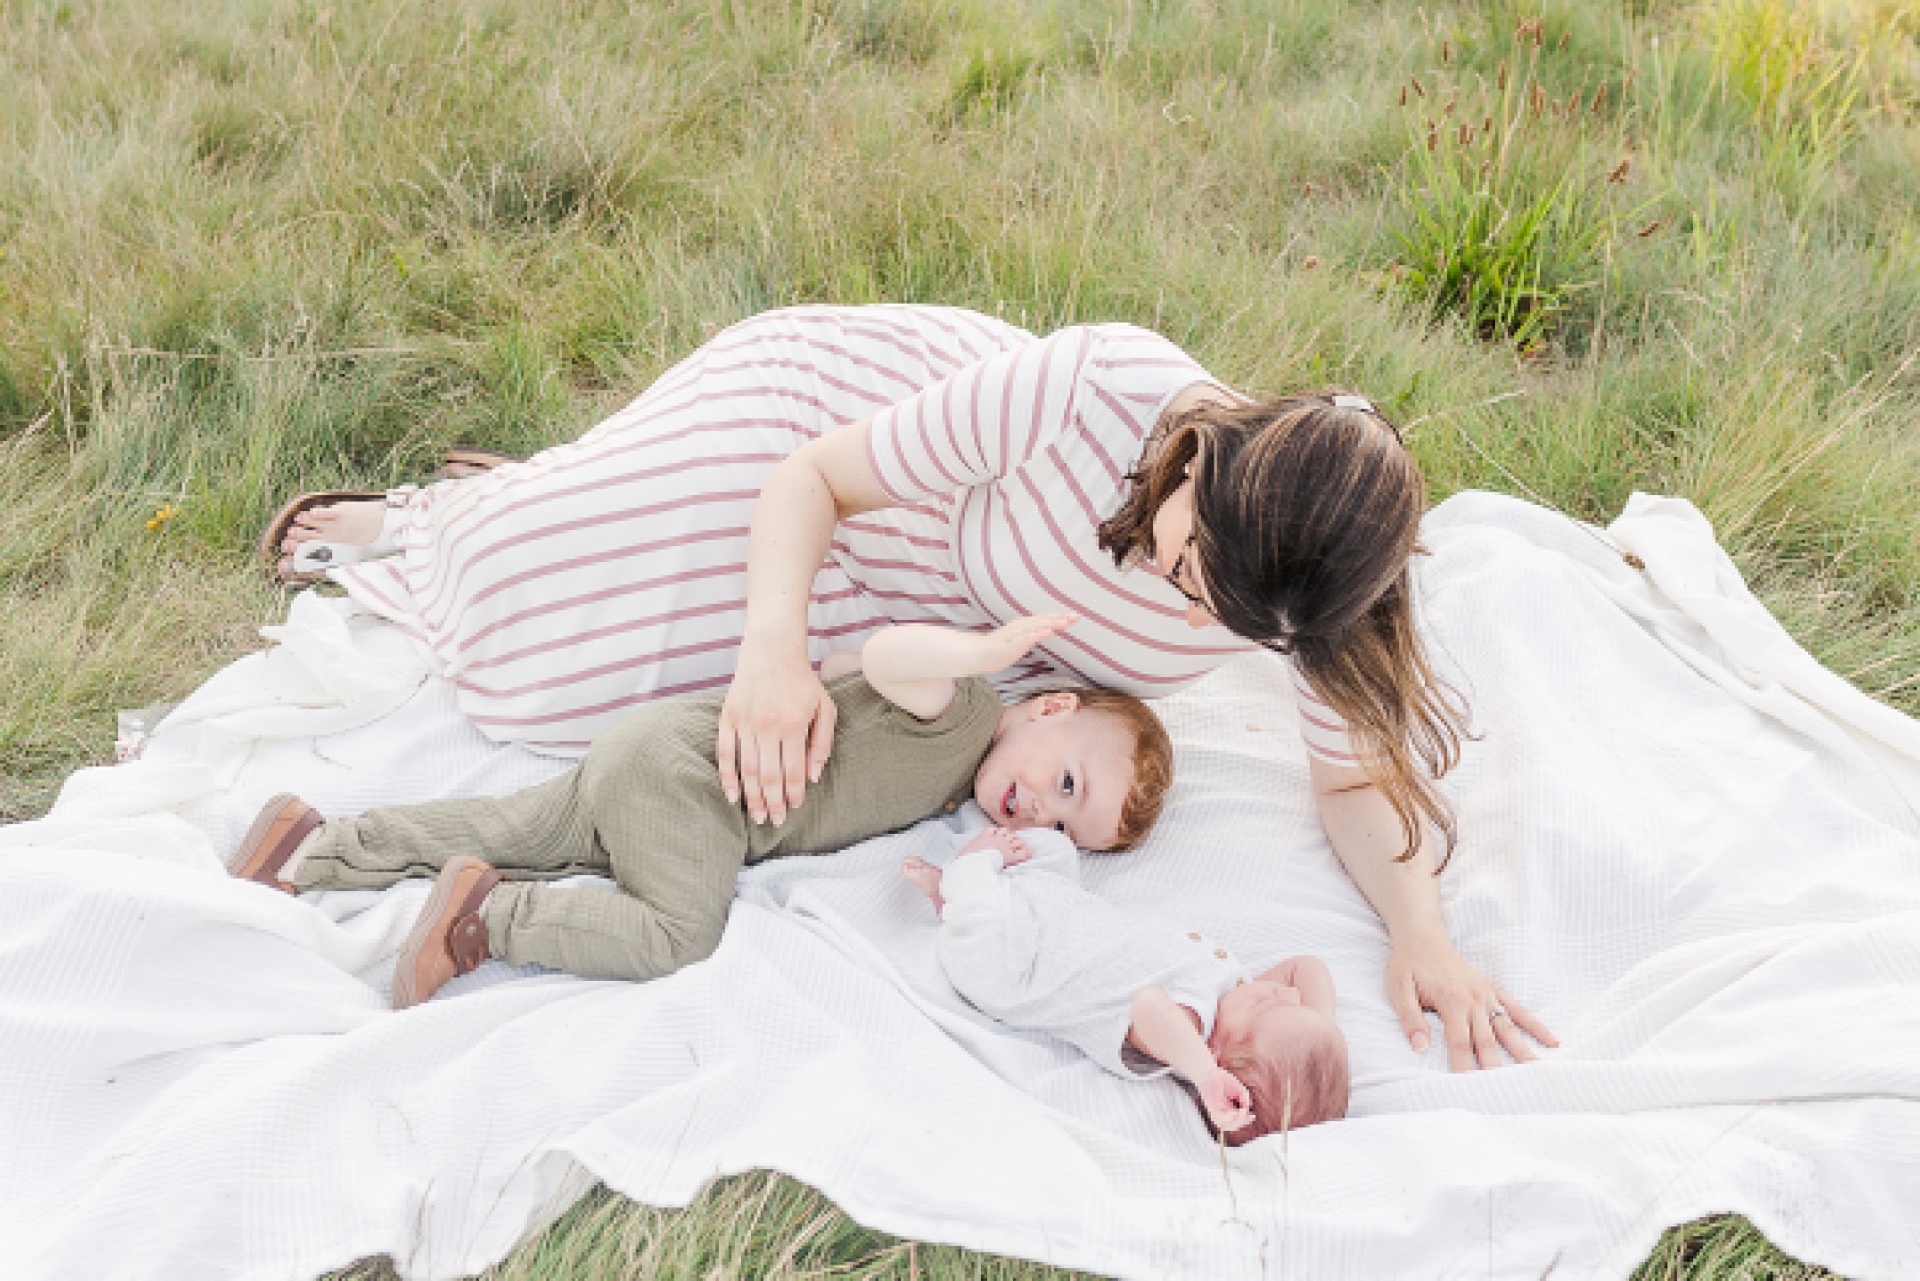 mom lays on blanket with toddler and baby during outdoor newborn photo session with Sara Sniderman Photography at Oak Grove Park Millis Massachusetts